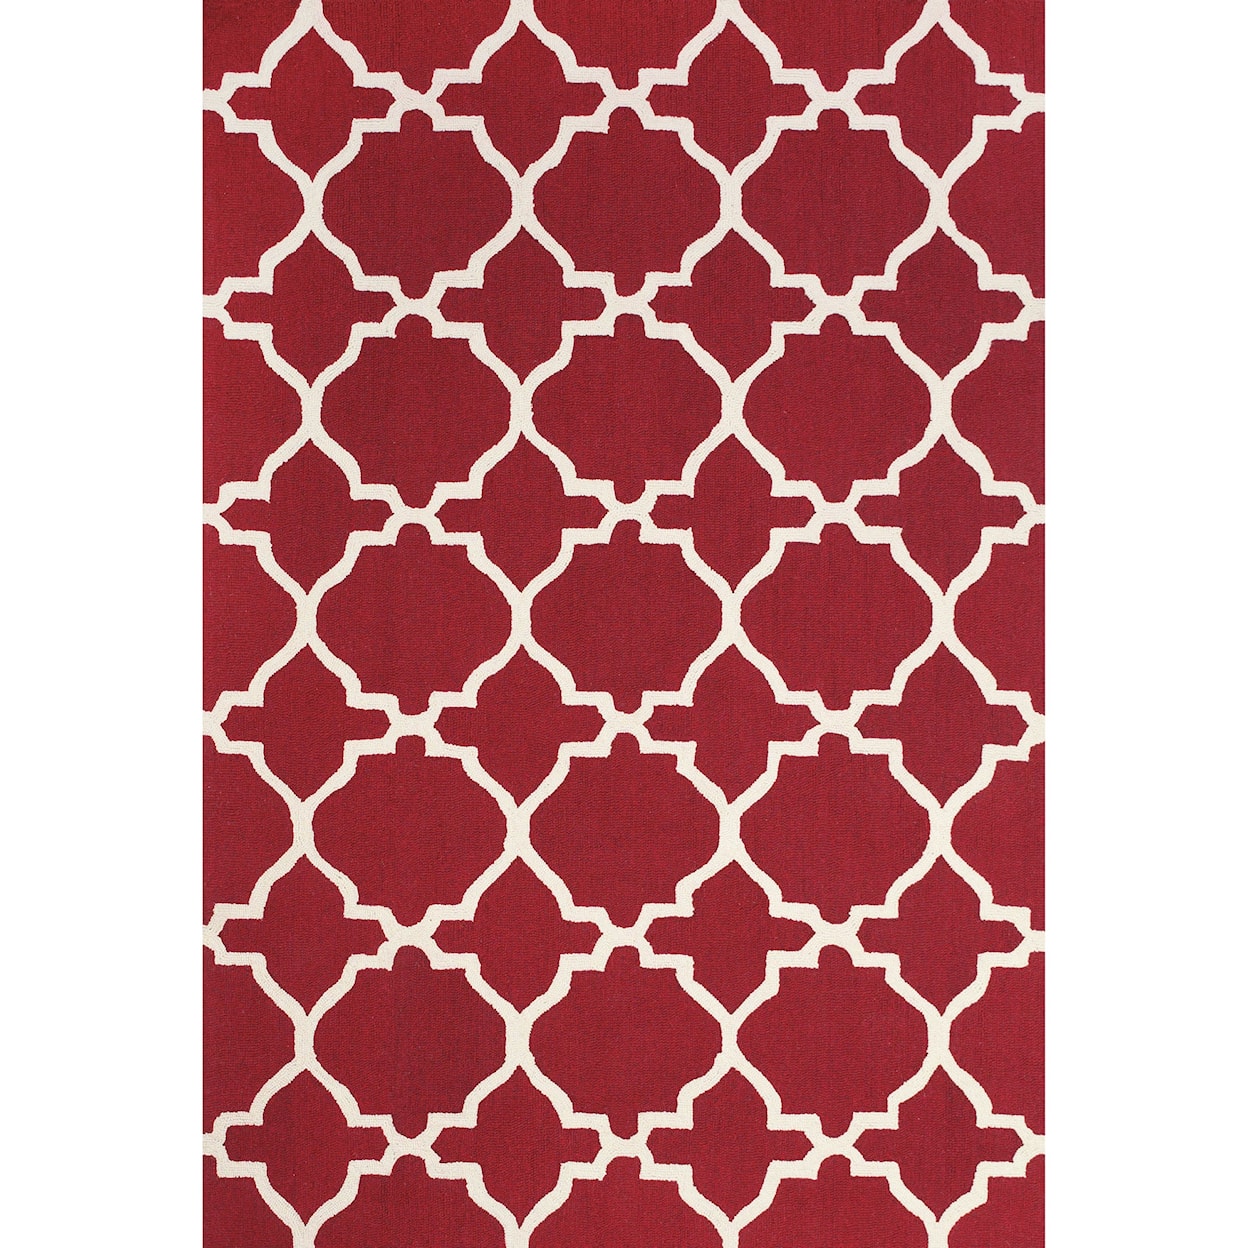 Feizy Rugs Cetara Red/White 2' x 3' Area Rug